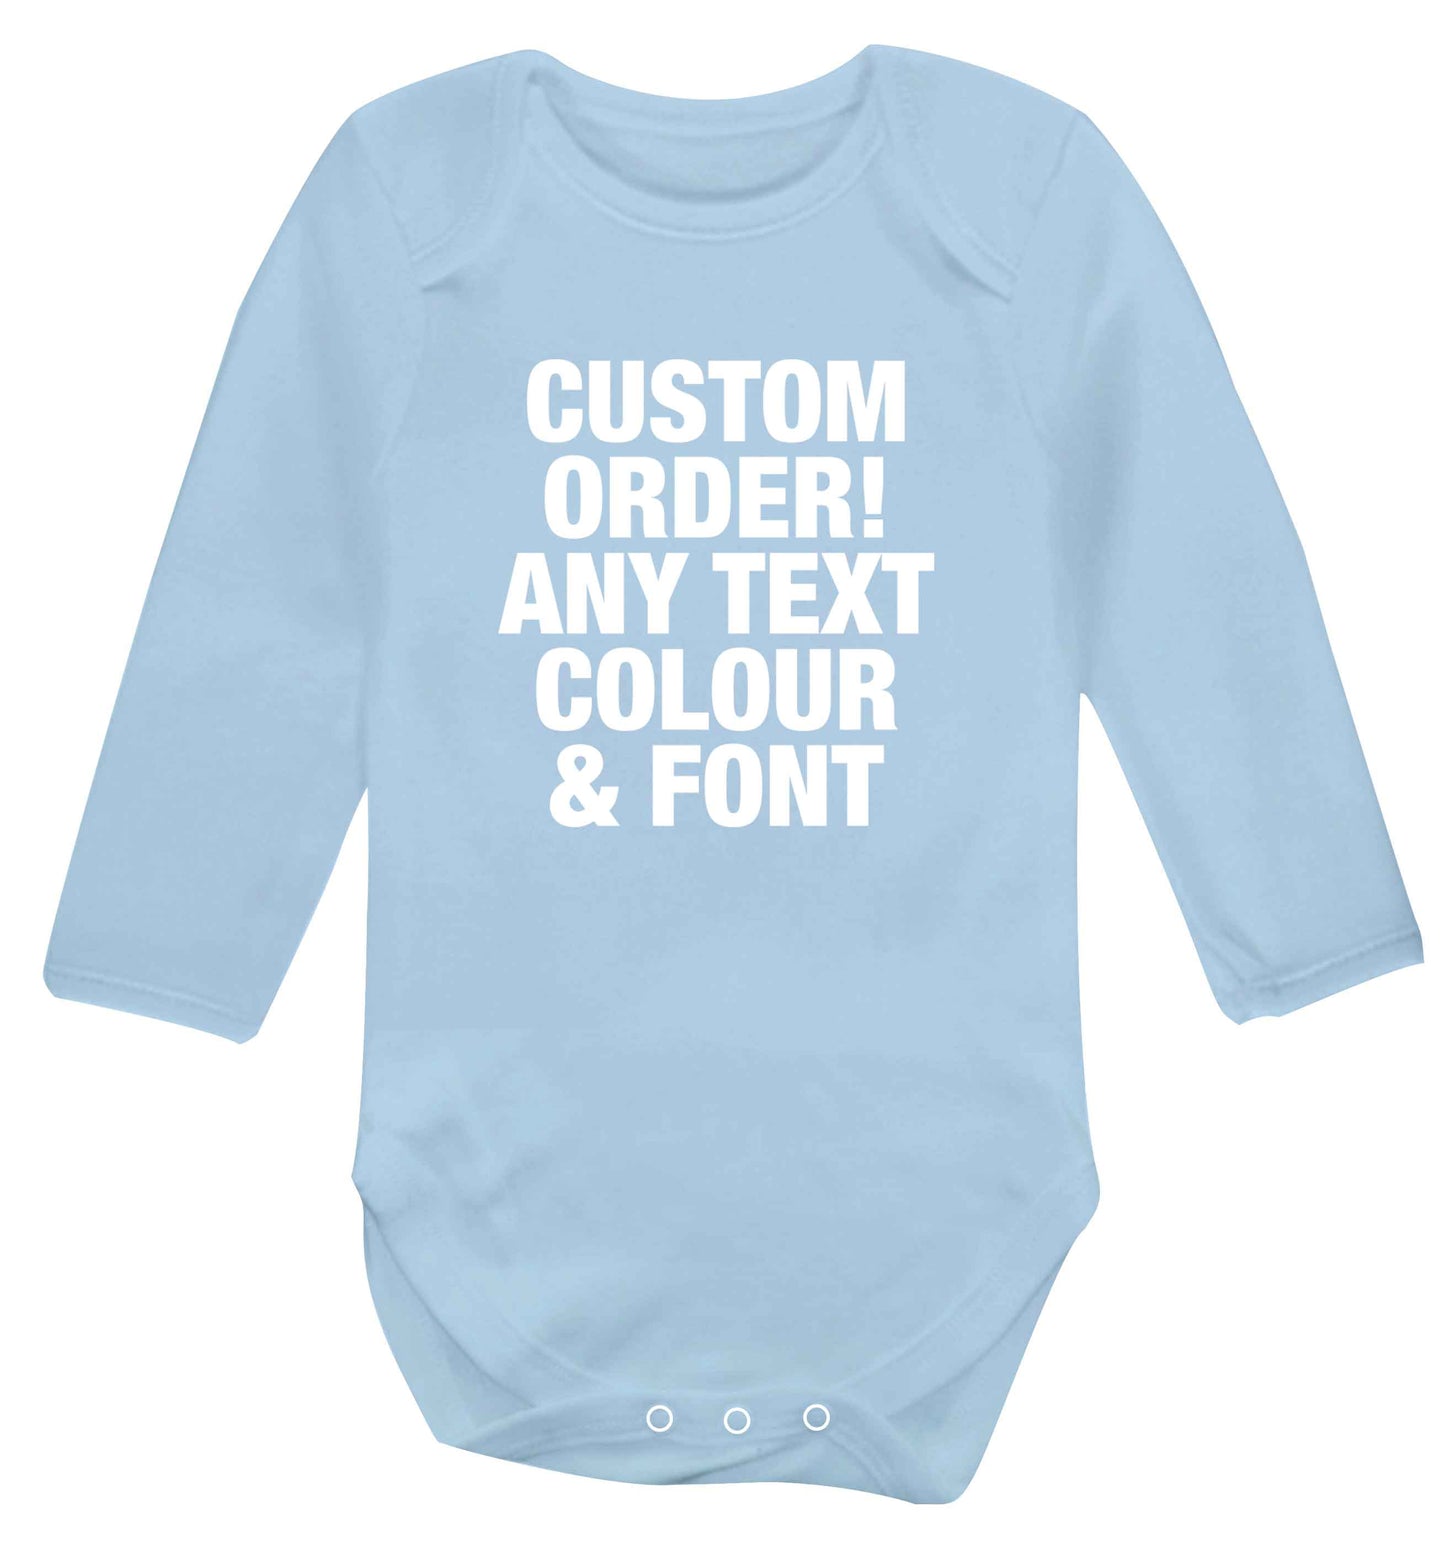 Custom order any text colour and font baby vest long sleeved pale blue 6-12 months